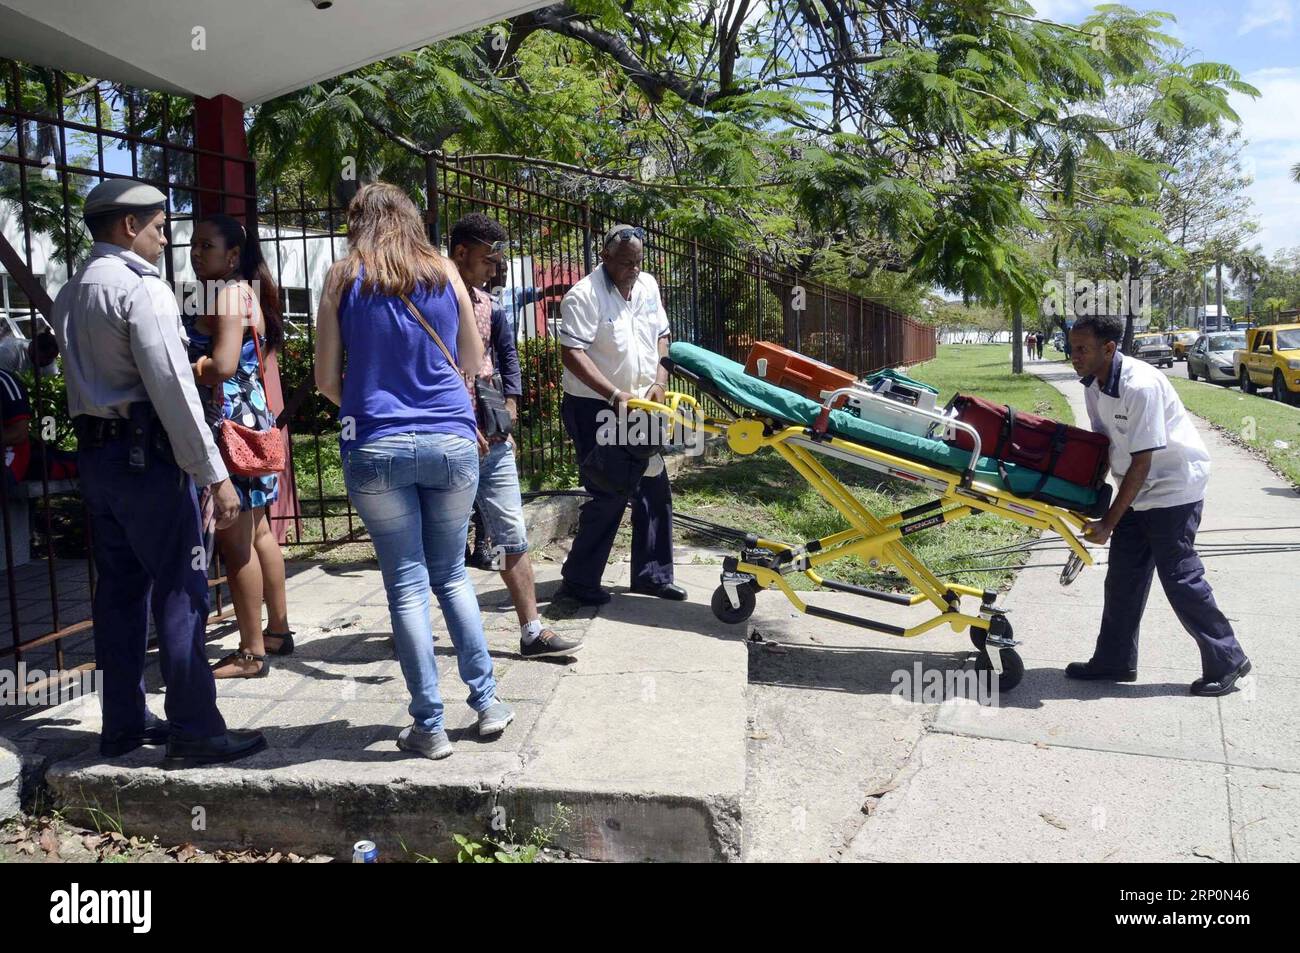 (180519) -- HAVANA, May 19, 2018 -- Relatives of the victims of the airplane crash wait at the entrance of the Institute of Legal Medicine of Havana in Havana, Cuba, on May 19, 2018. Cuba confirms here on Saturday that 110 were dead from Friday s Boeing 737 crash close to Havana s Jose Marti International Airport. ) CUBA-HAVANA-AIRPLANE-CRASH JoaquinxHernandez PUBLICATIONxNOTxINxCHN Stock Photo